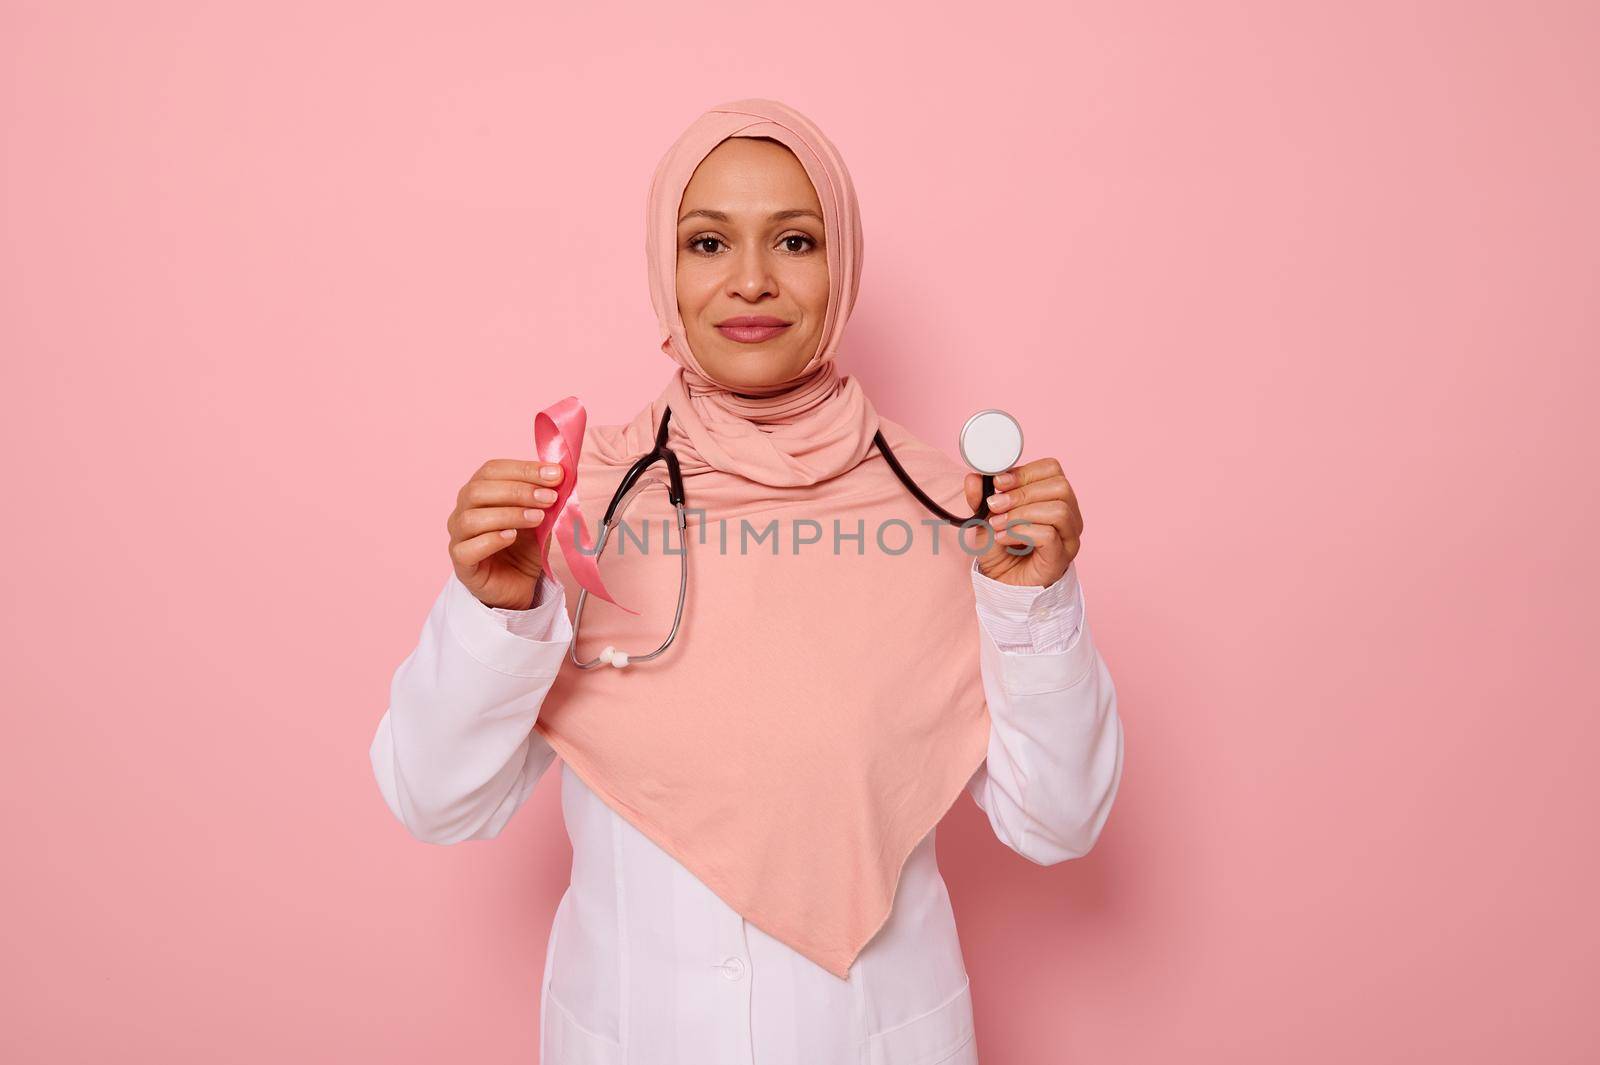 Portrait of Arab Muslim female doctor with covered head in pink hijab, posing on colored background with a pink ribbon and stethoscope in hands, supporting cancer patients and survivors, 1 st October by artgf